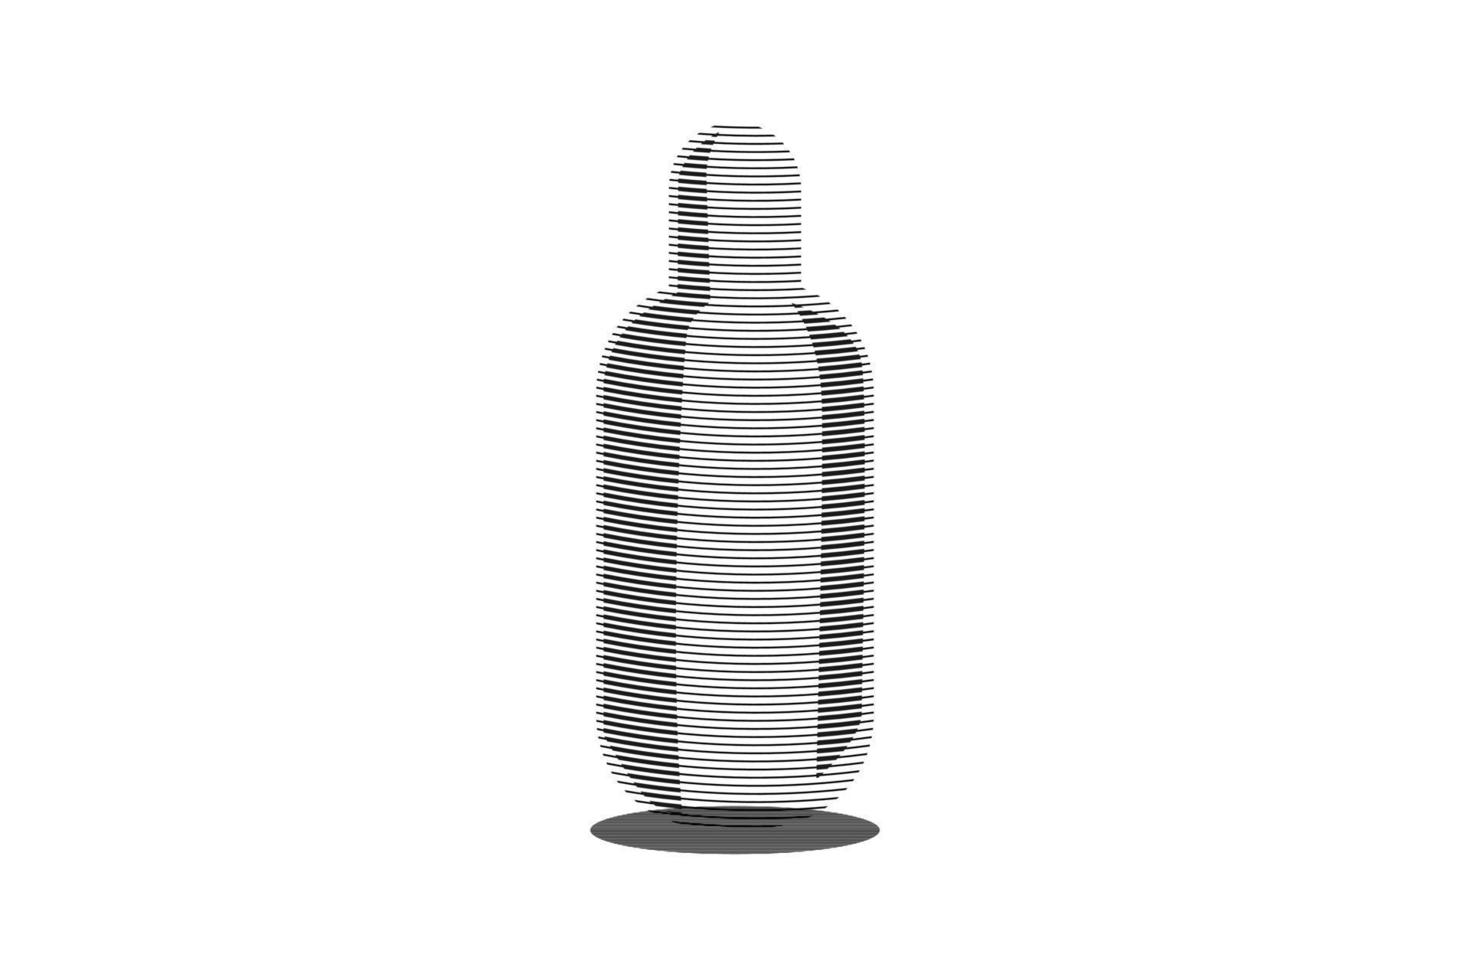 shading of a bottle or bottle in line art style vector